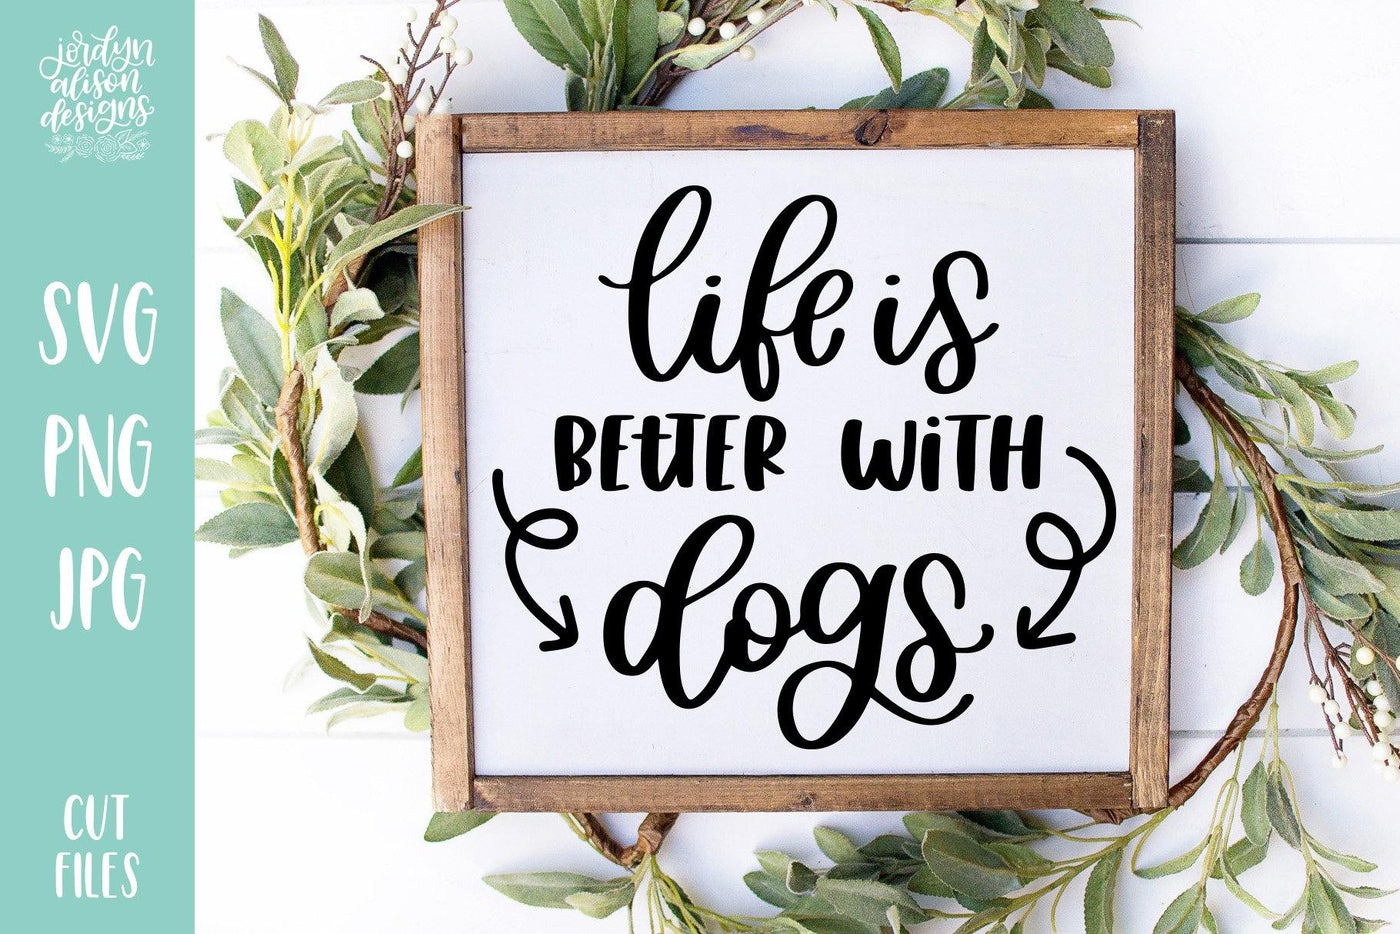 Cut File | Life is Better with Dogs - JordynAlisonDesigns